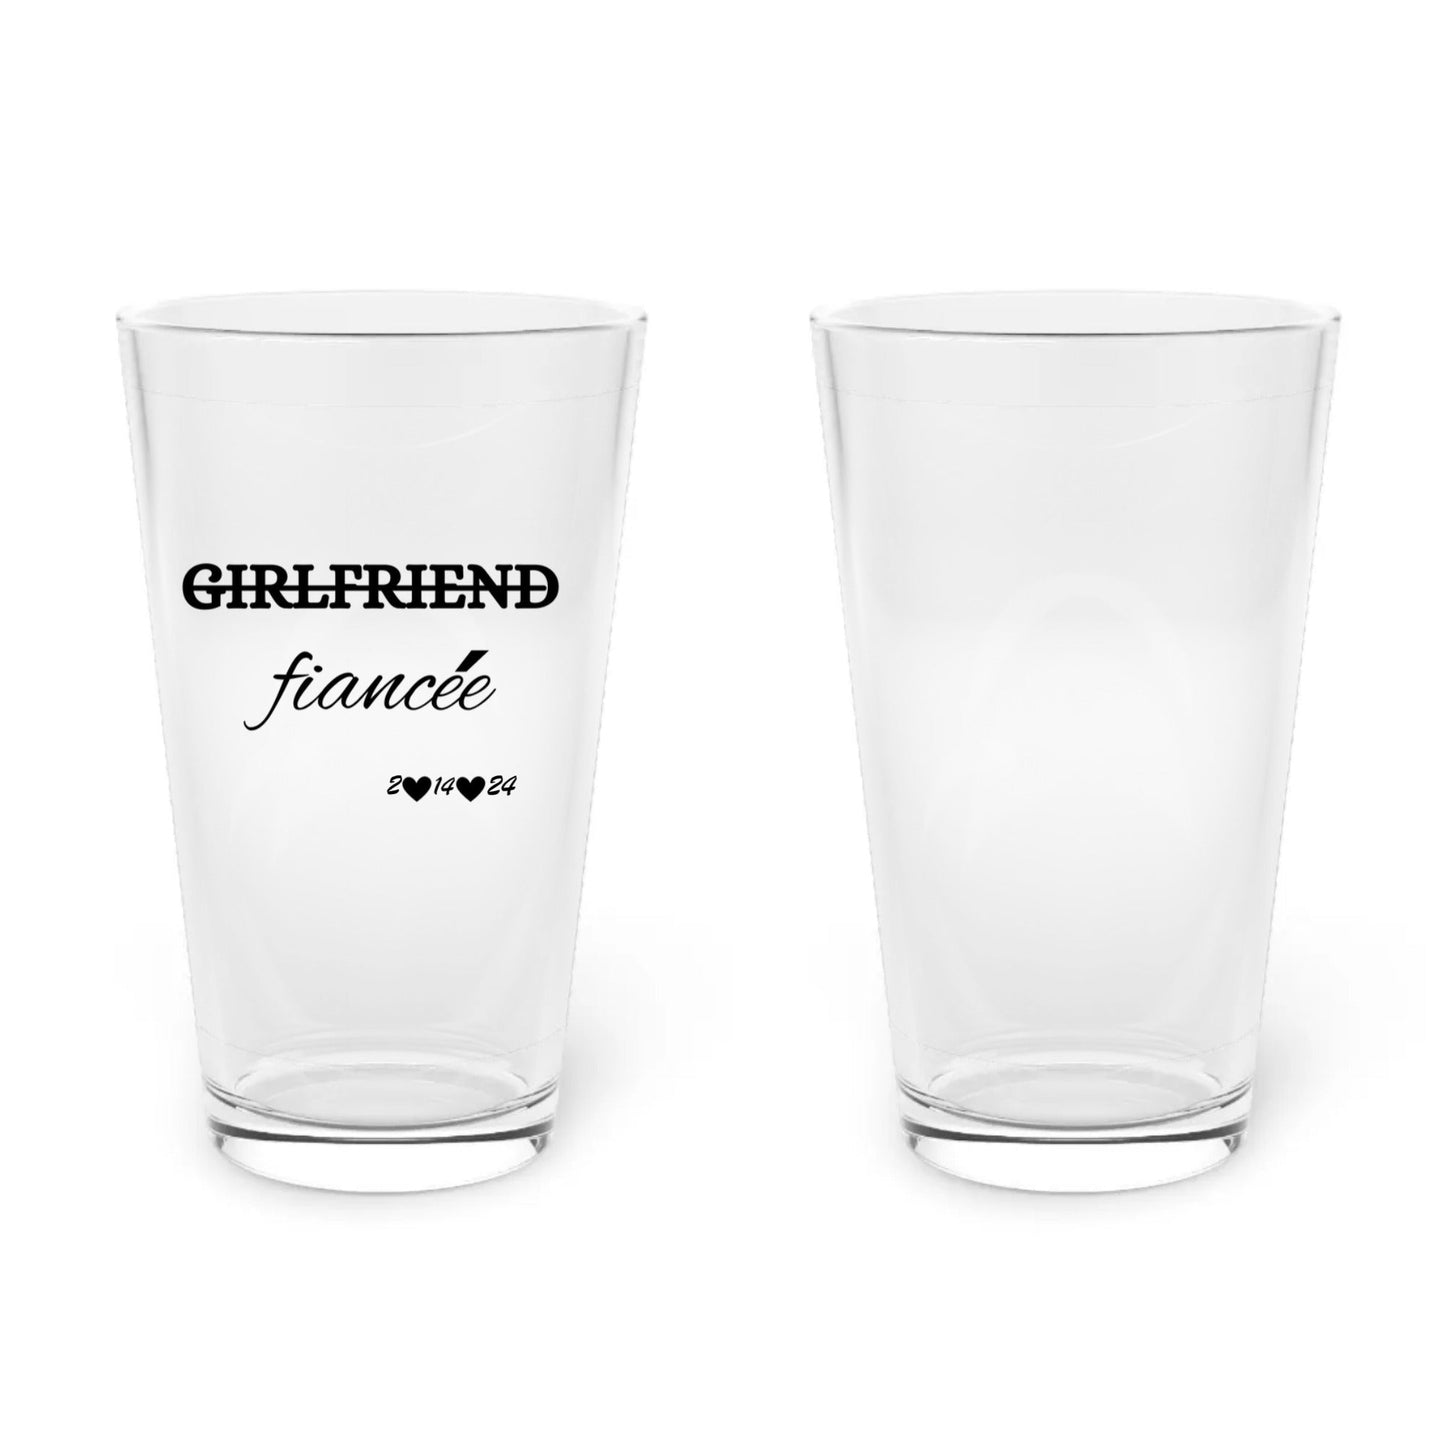 Get trendy with From Girlfriend to Fiancee Pint Glass, 16oz -  available at Good Gift Company. Grab yours for $17 today!